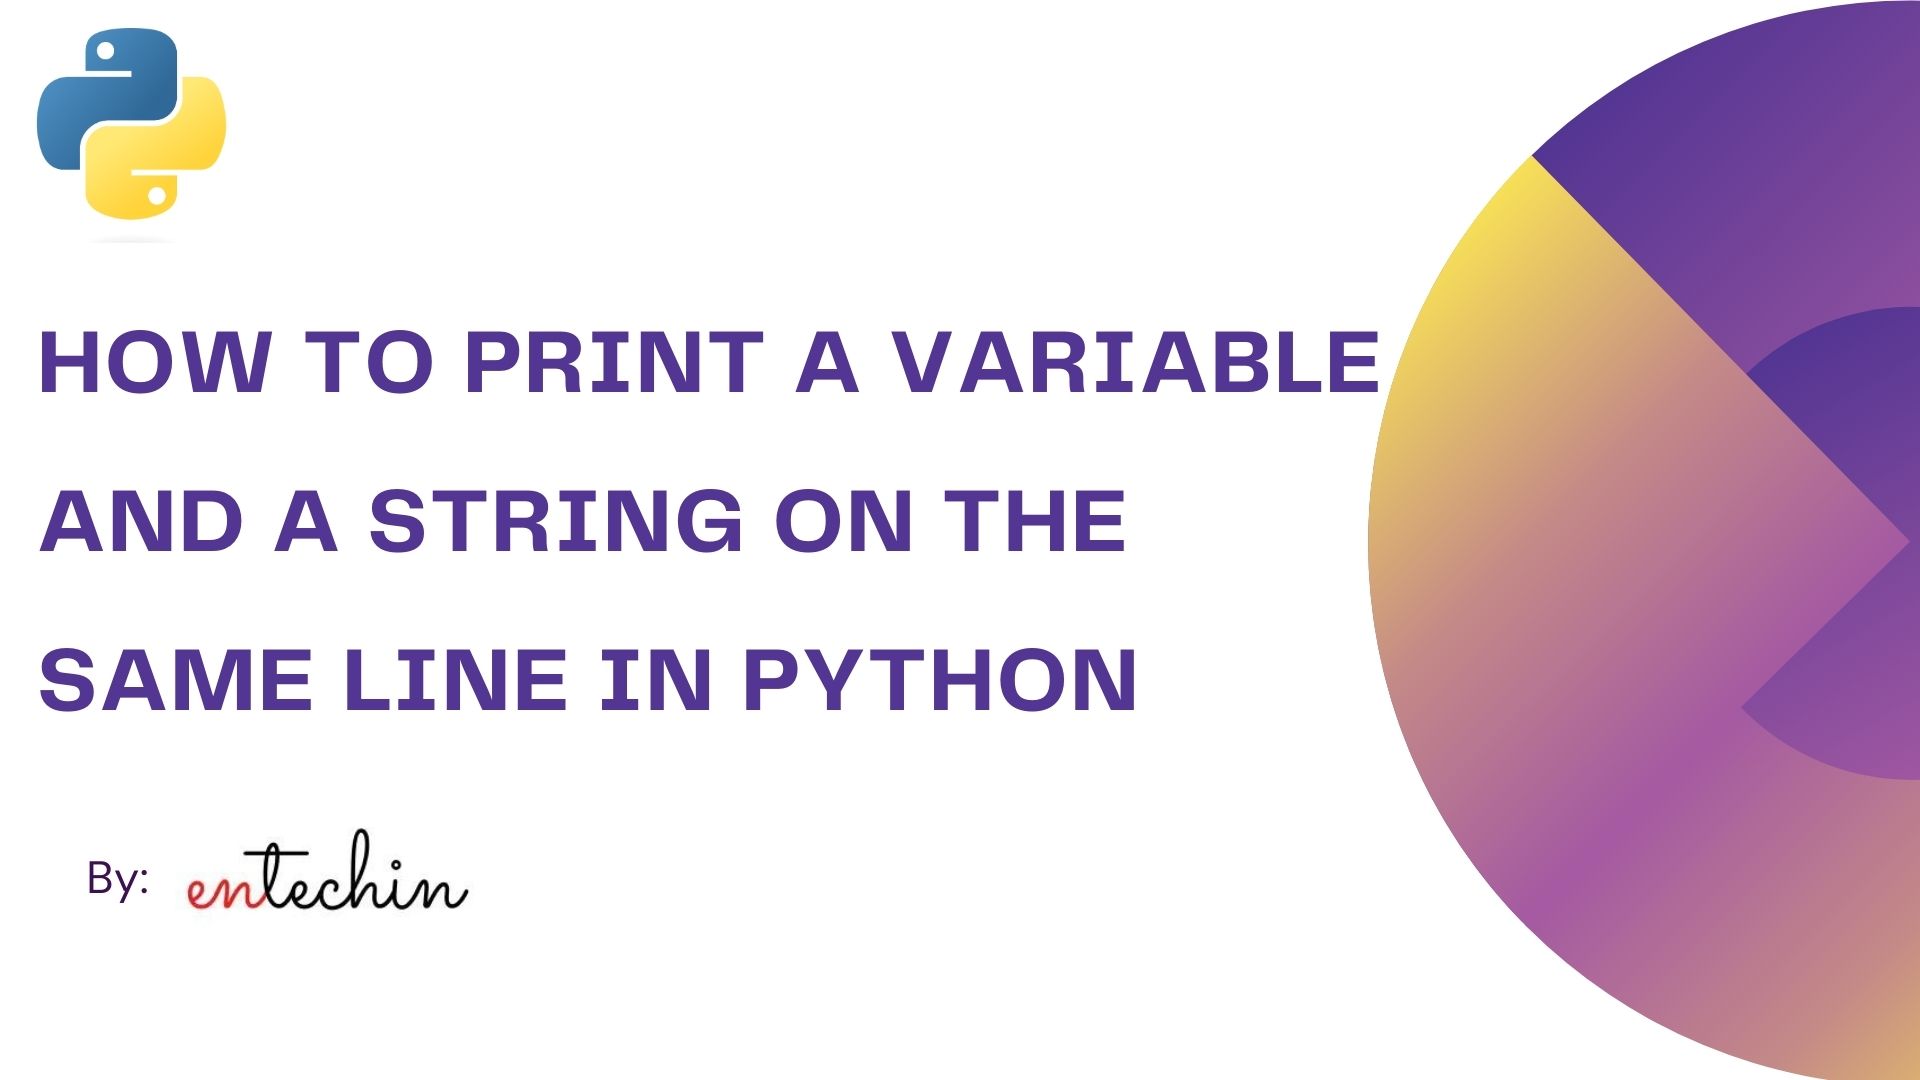 How to print a variable and a String on the same line in Python